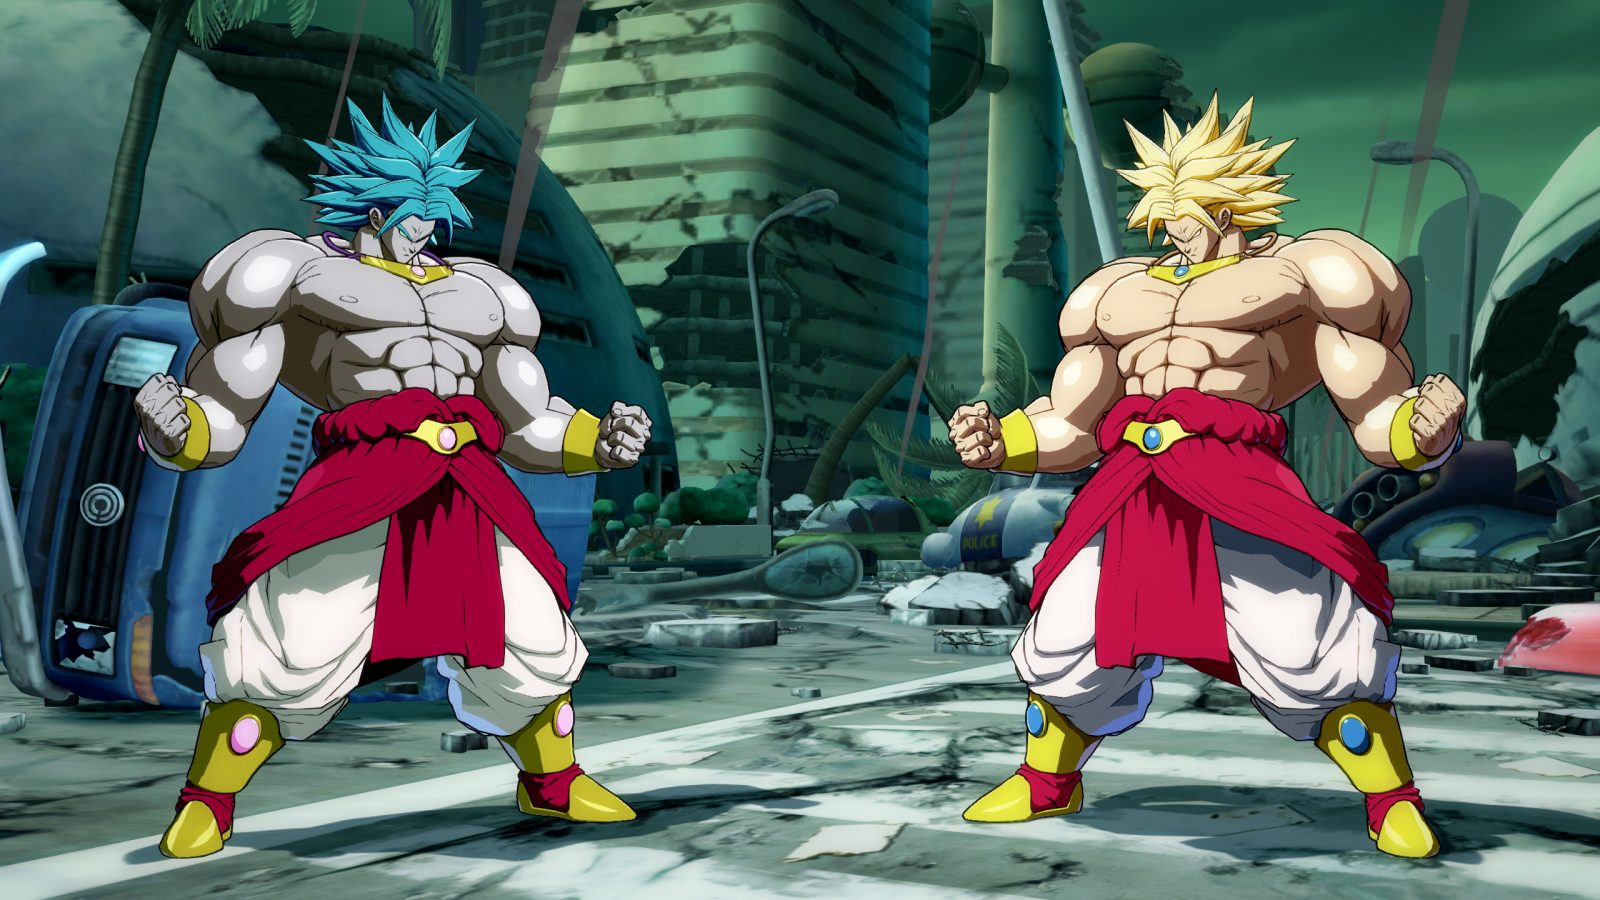 Broly Z Recolor by BenichonSan (me) - FighterZ Mods